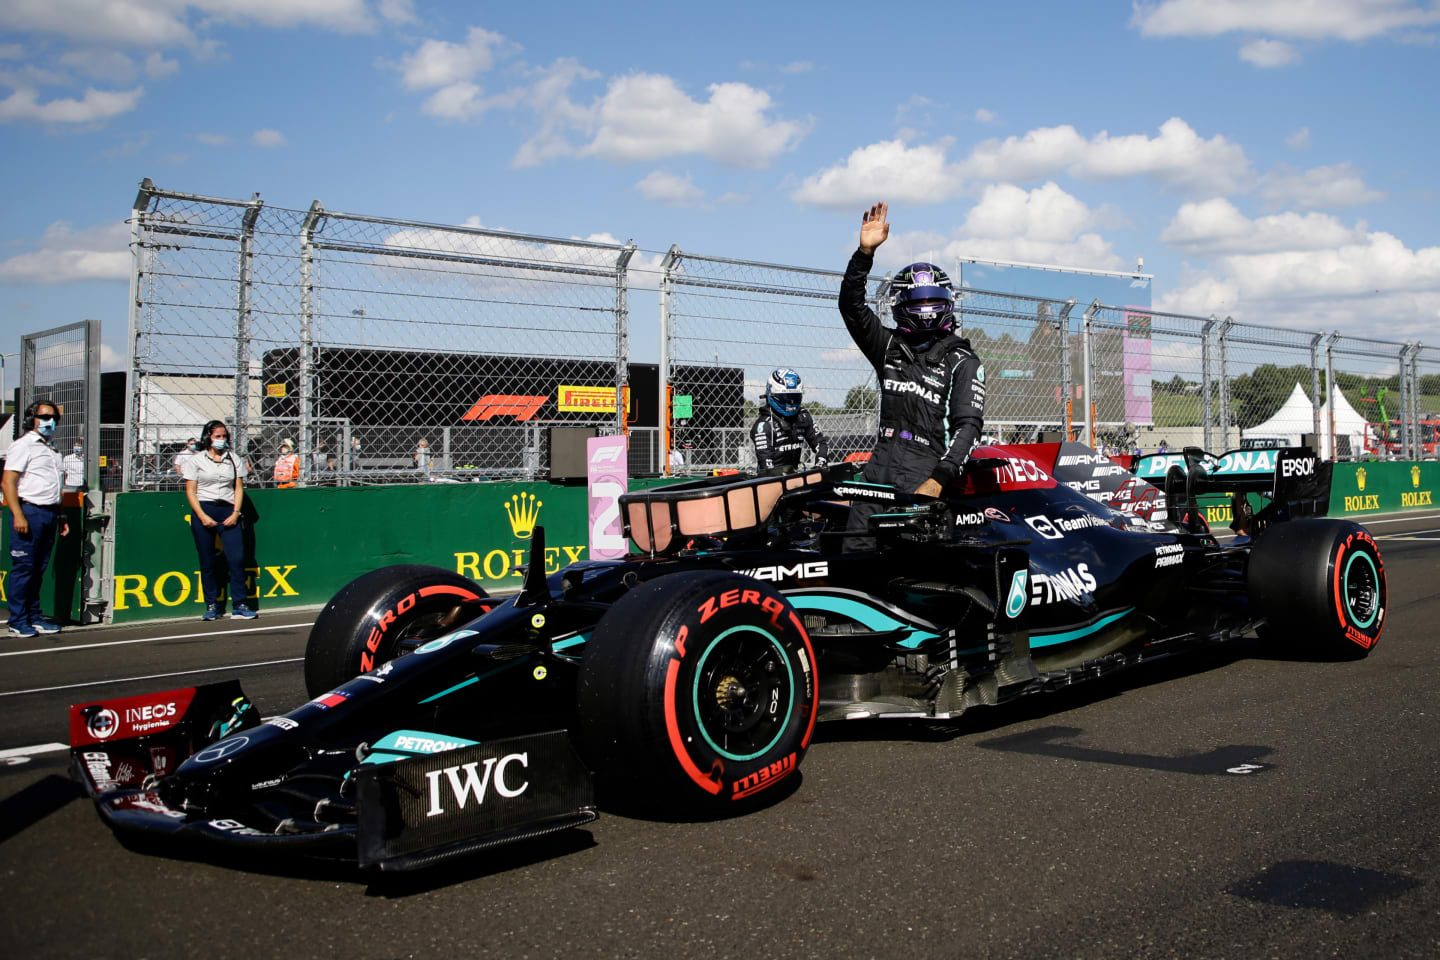 BUDAPEST, HUNGARY - JULY 31: Pole position qualifier Lewis Hamilton of Great Britain and Mercedes